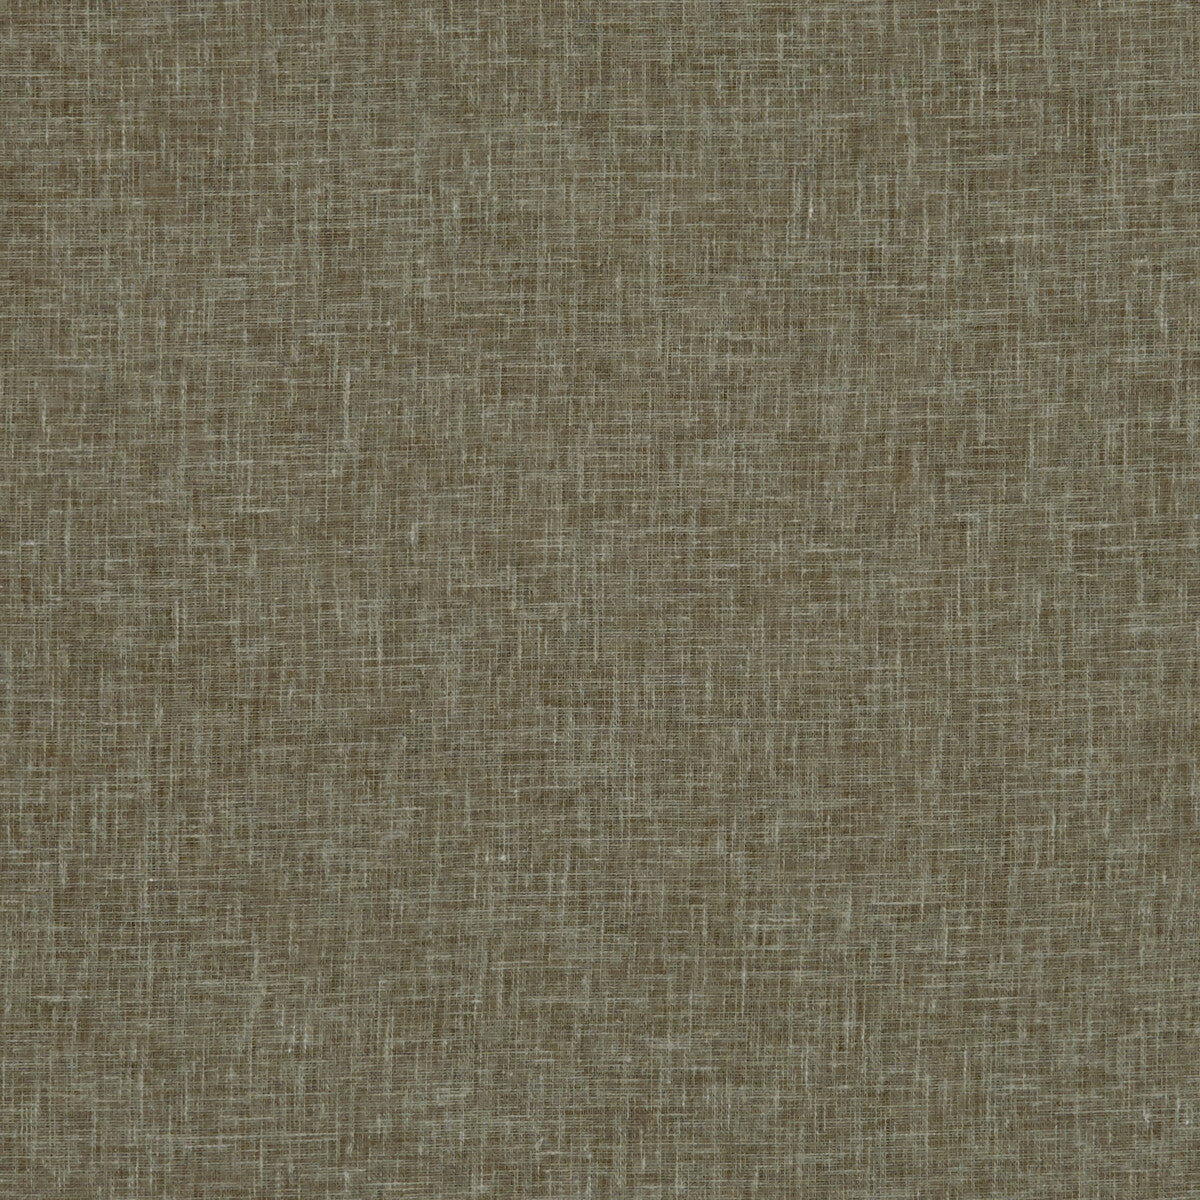 Midori fabric in truffle color - pattern F1068/47.CAC.0 - by Clarke And Clarke in the Clarke &amp; Clarke Midori collection